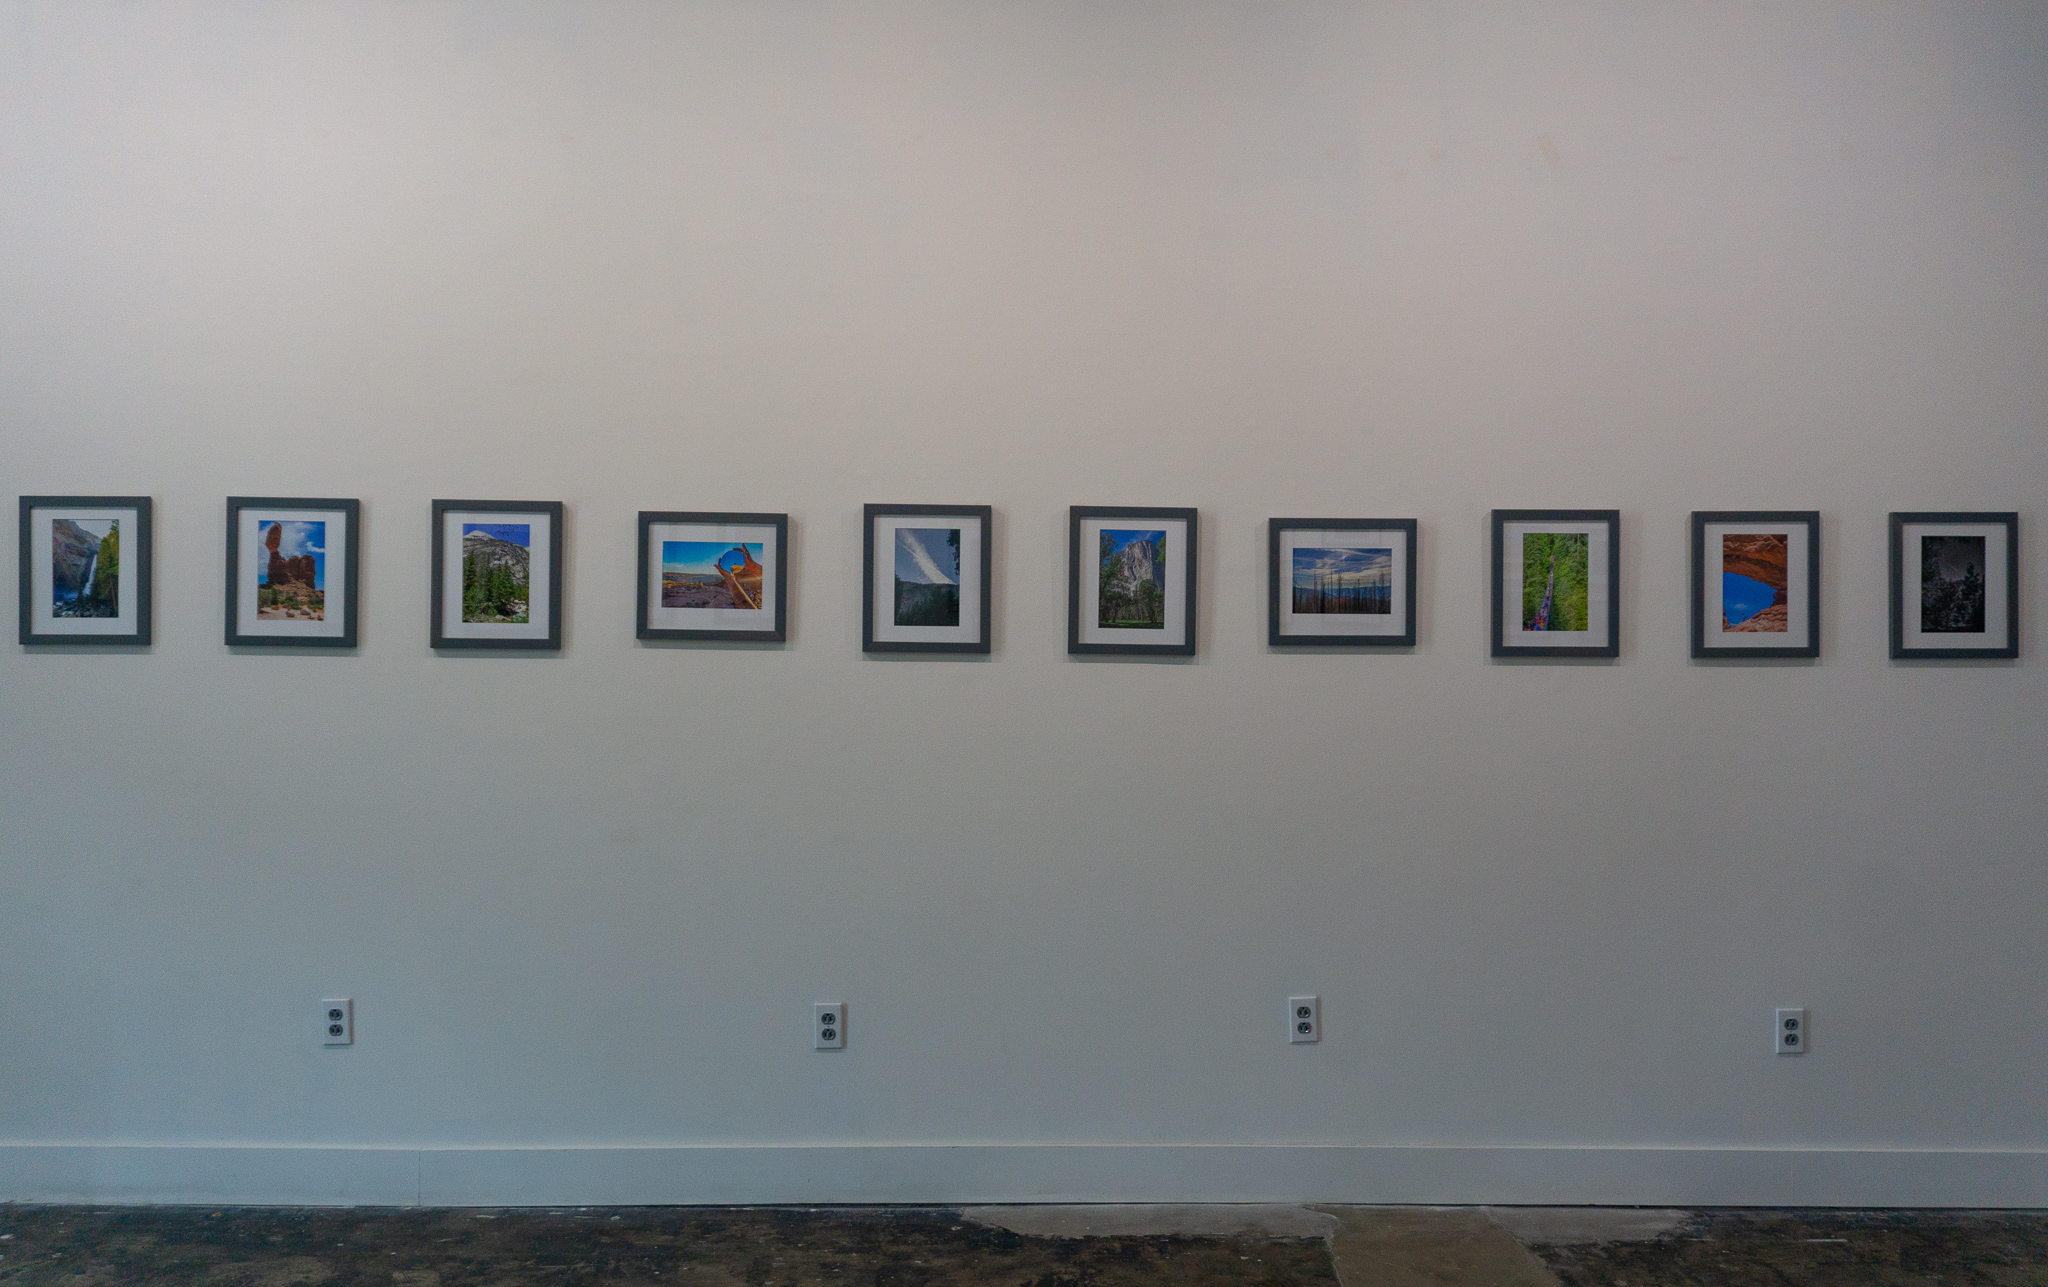 A zoomed out view of photos from the installation